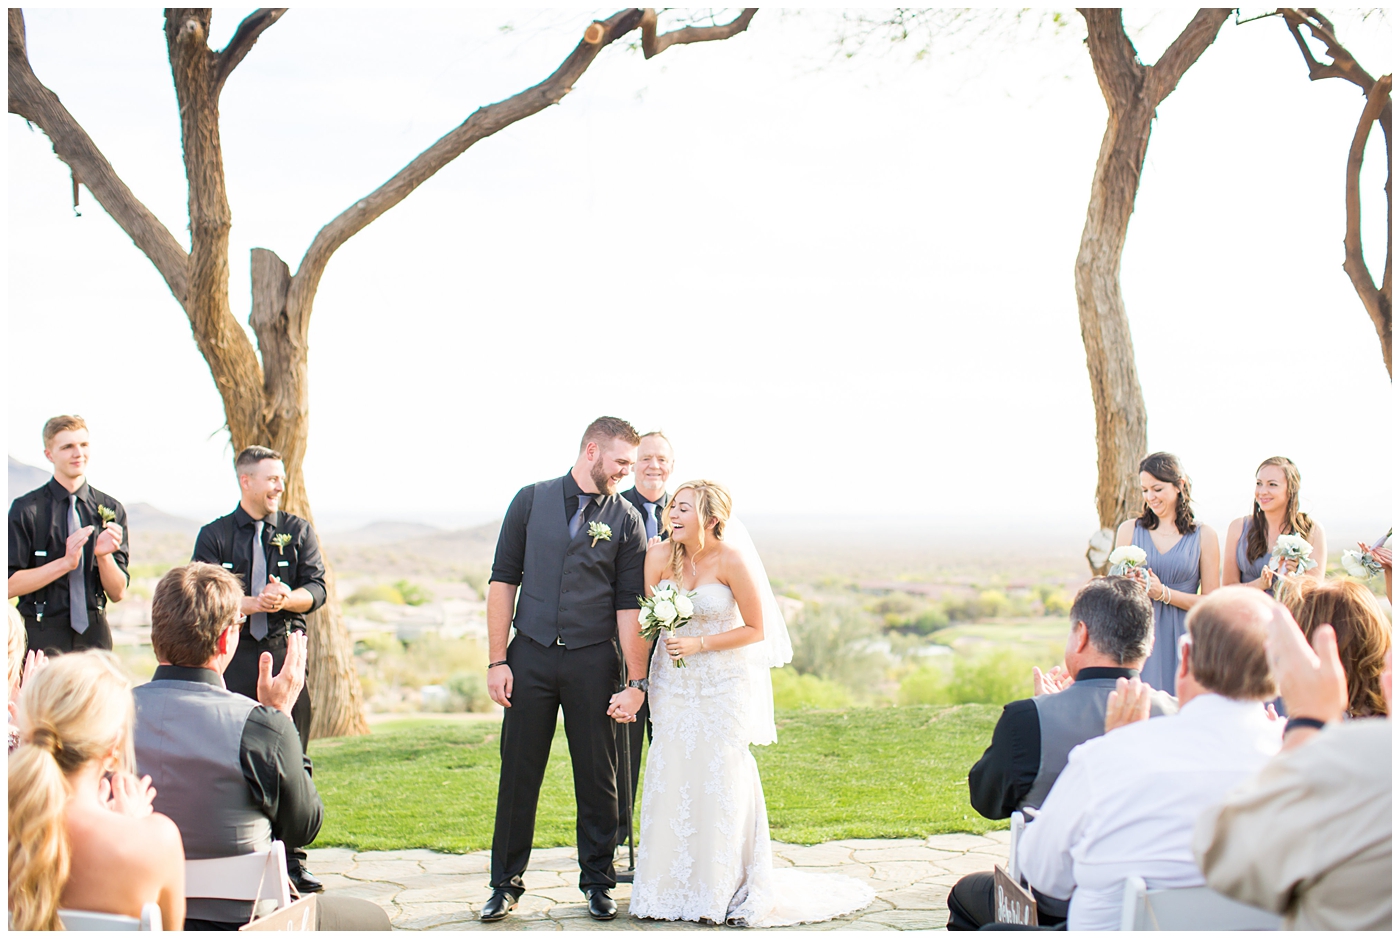 bride with fishtail braid and strapless dress with white rose and greenery bouquet with groom in black pants and vest and tie with rolled up shirt sleeves with succulent boutonniere during outdoor wedding ceremony